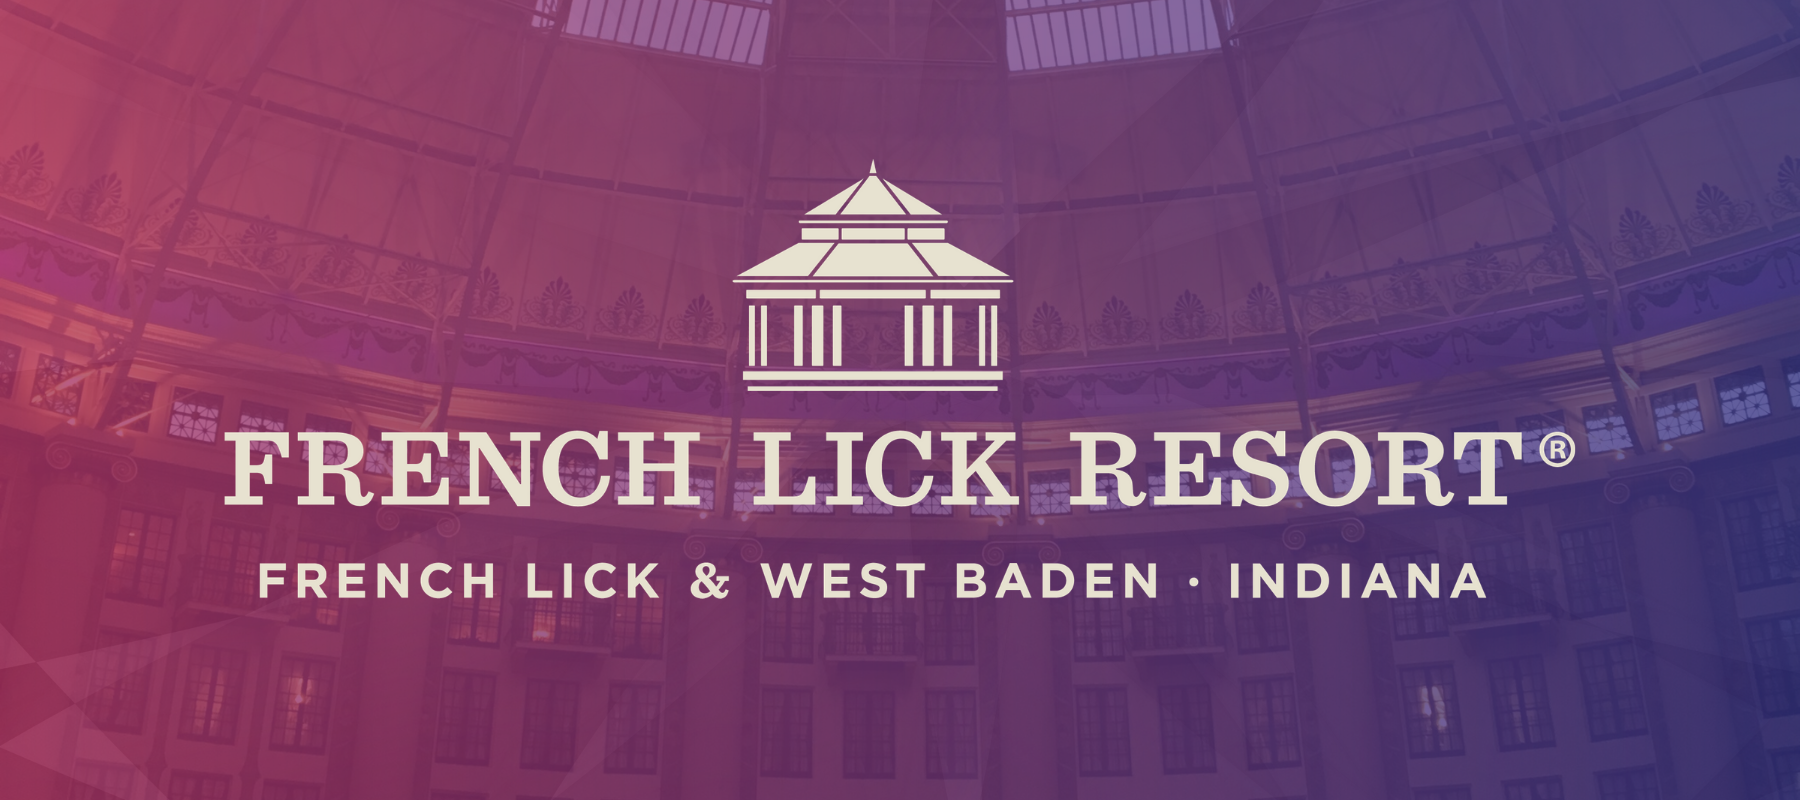 French Lick Resort Text Image